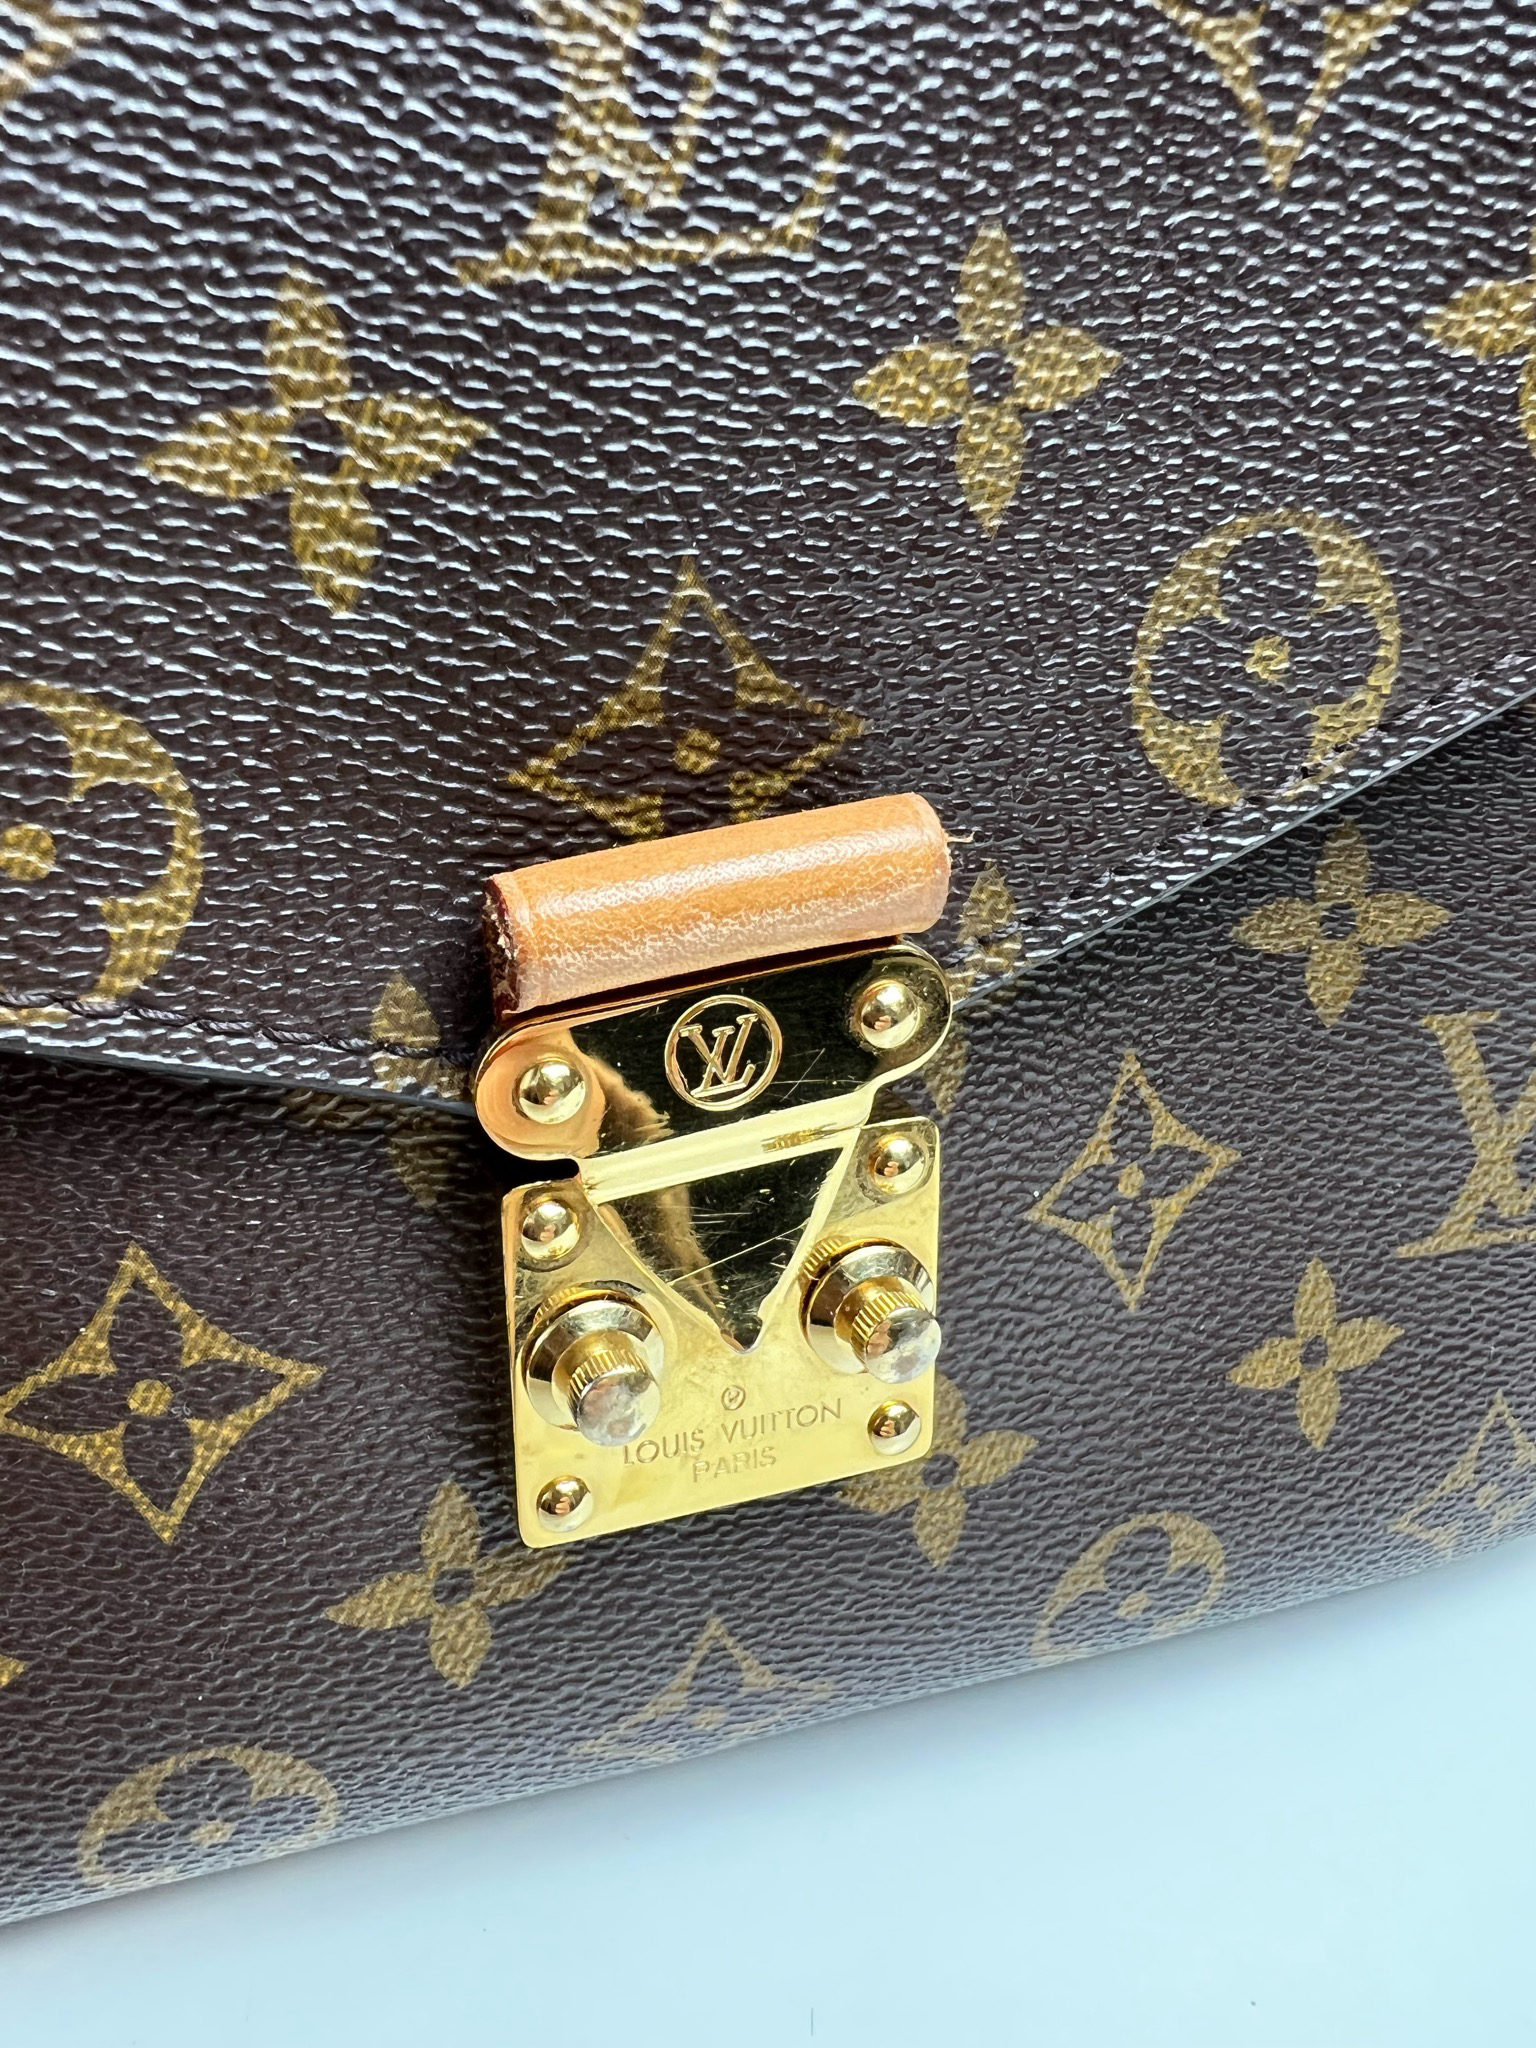 Louis Vuitton Pochette Metis, Black And Beige Leather With Gold Hardware,  Preowned In Box Wa001 - Julia Rose Boston